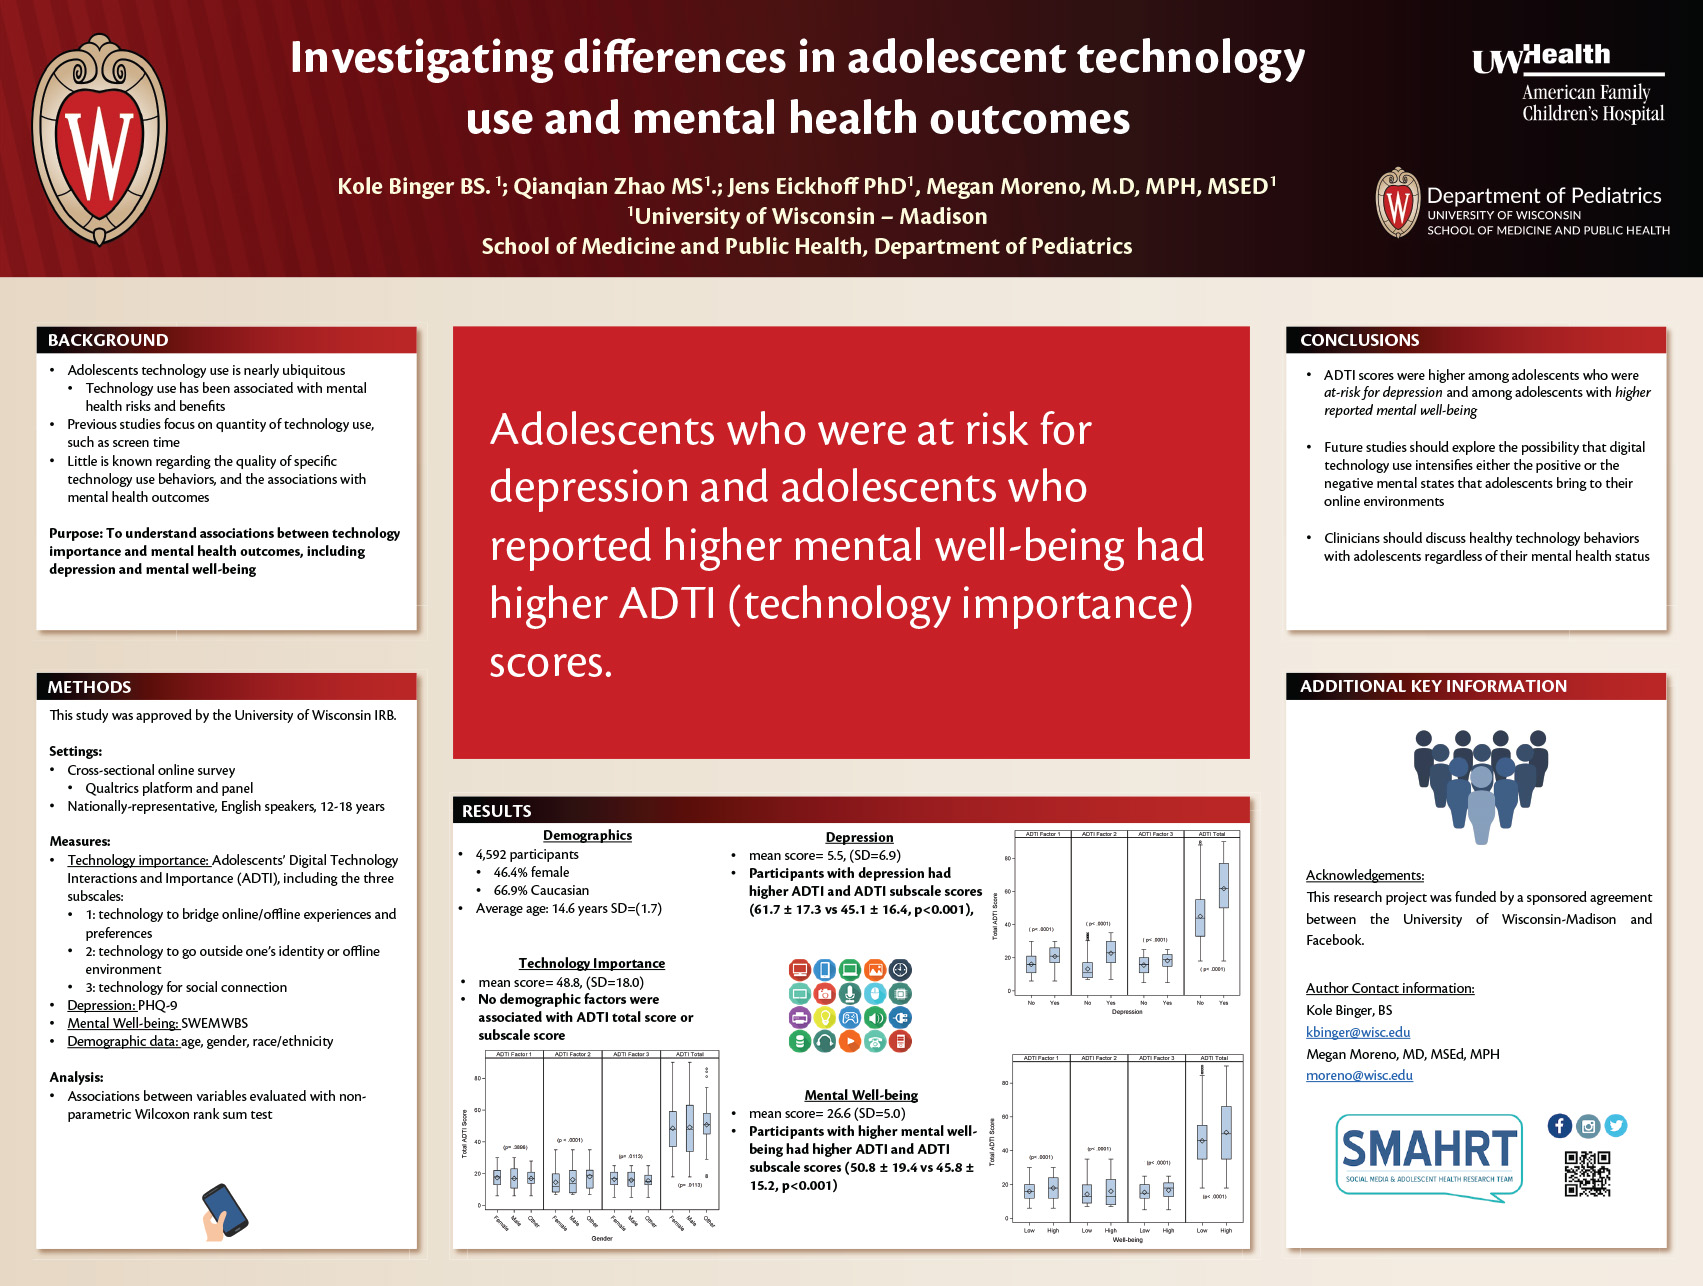 Investigating differences in adolescent technology use and mental health outcomes poster image